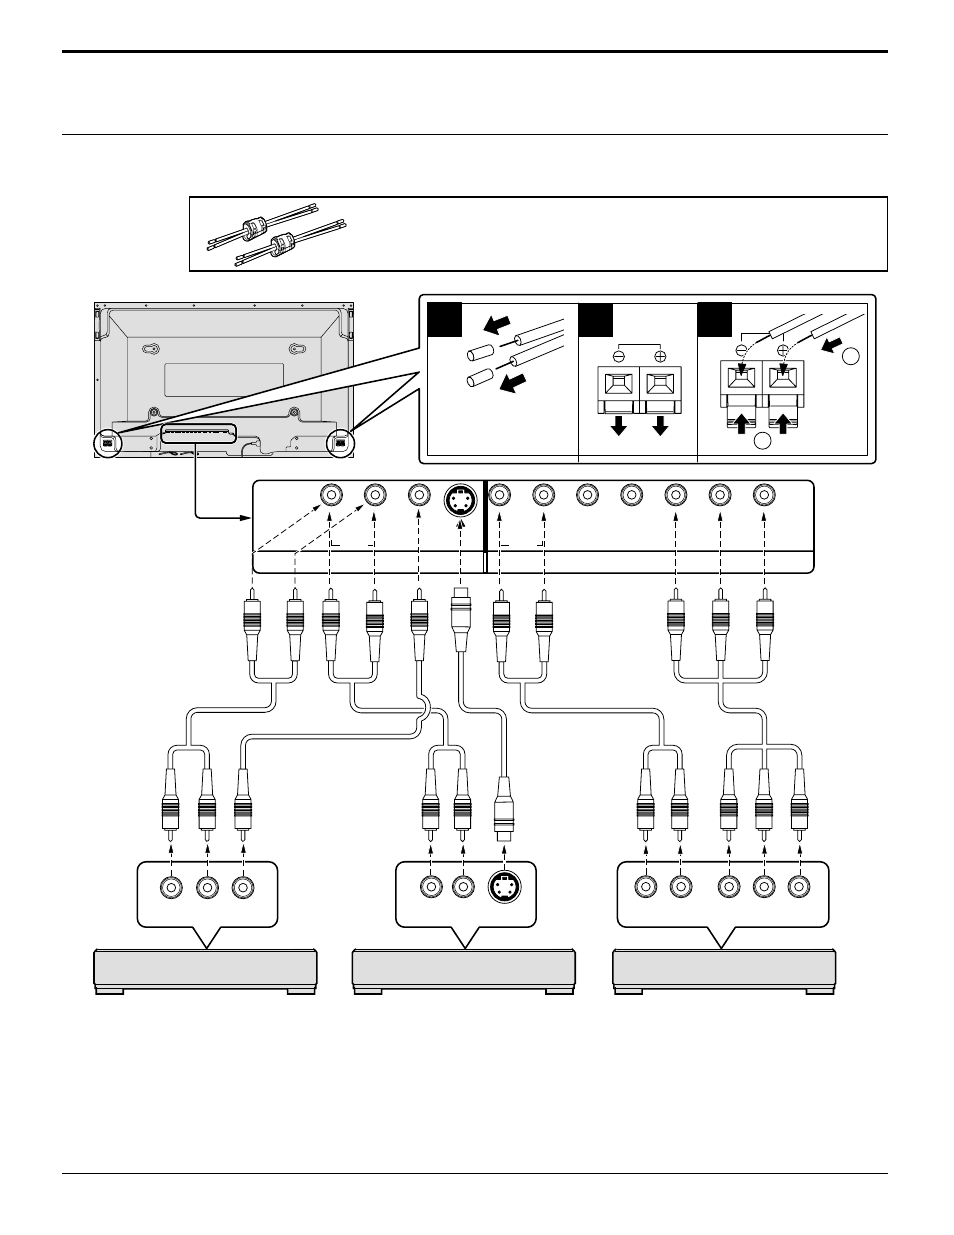 Speaker terminals connection, Connections, Connection s video cable | Yamaha PDM-1 User Manual | Page 14 / 40